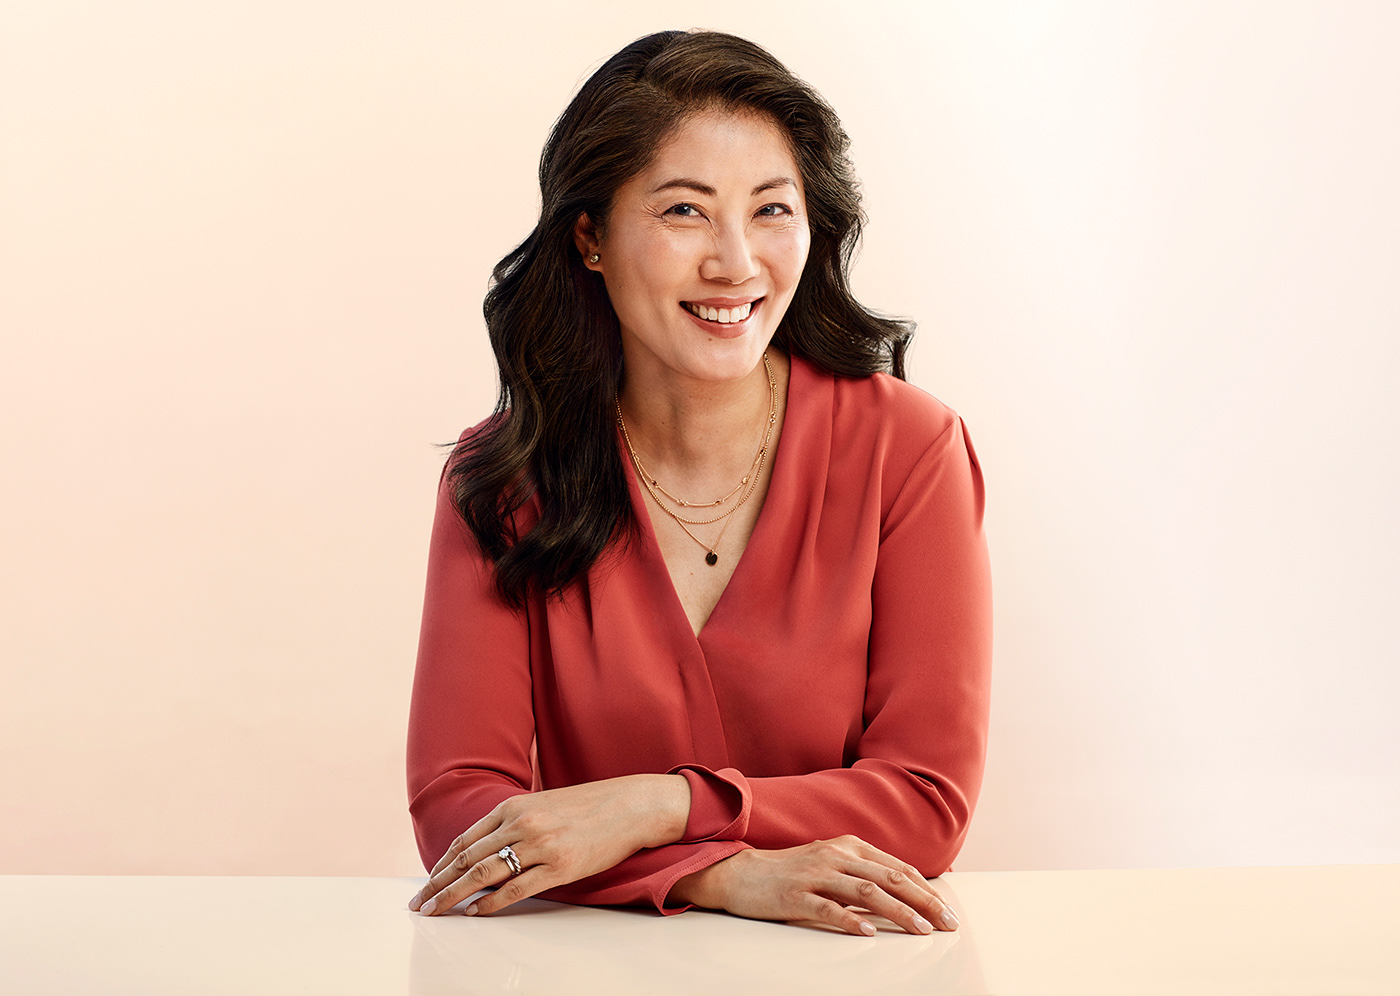 Asian American woman with wavy hair smiling wearing light red shirt, hands folded on table